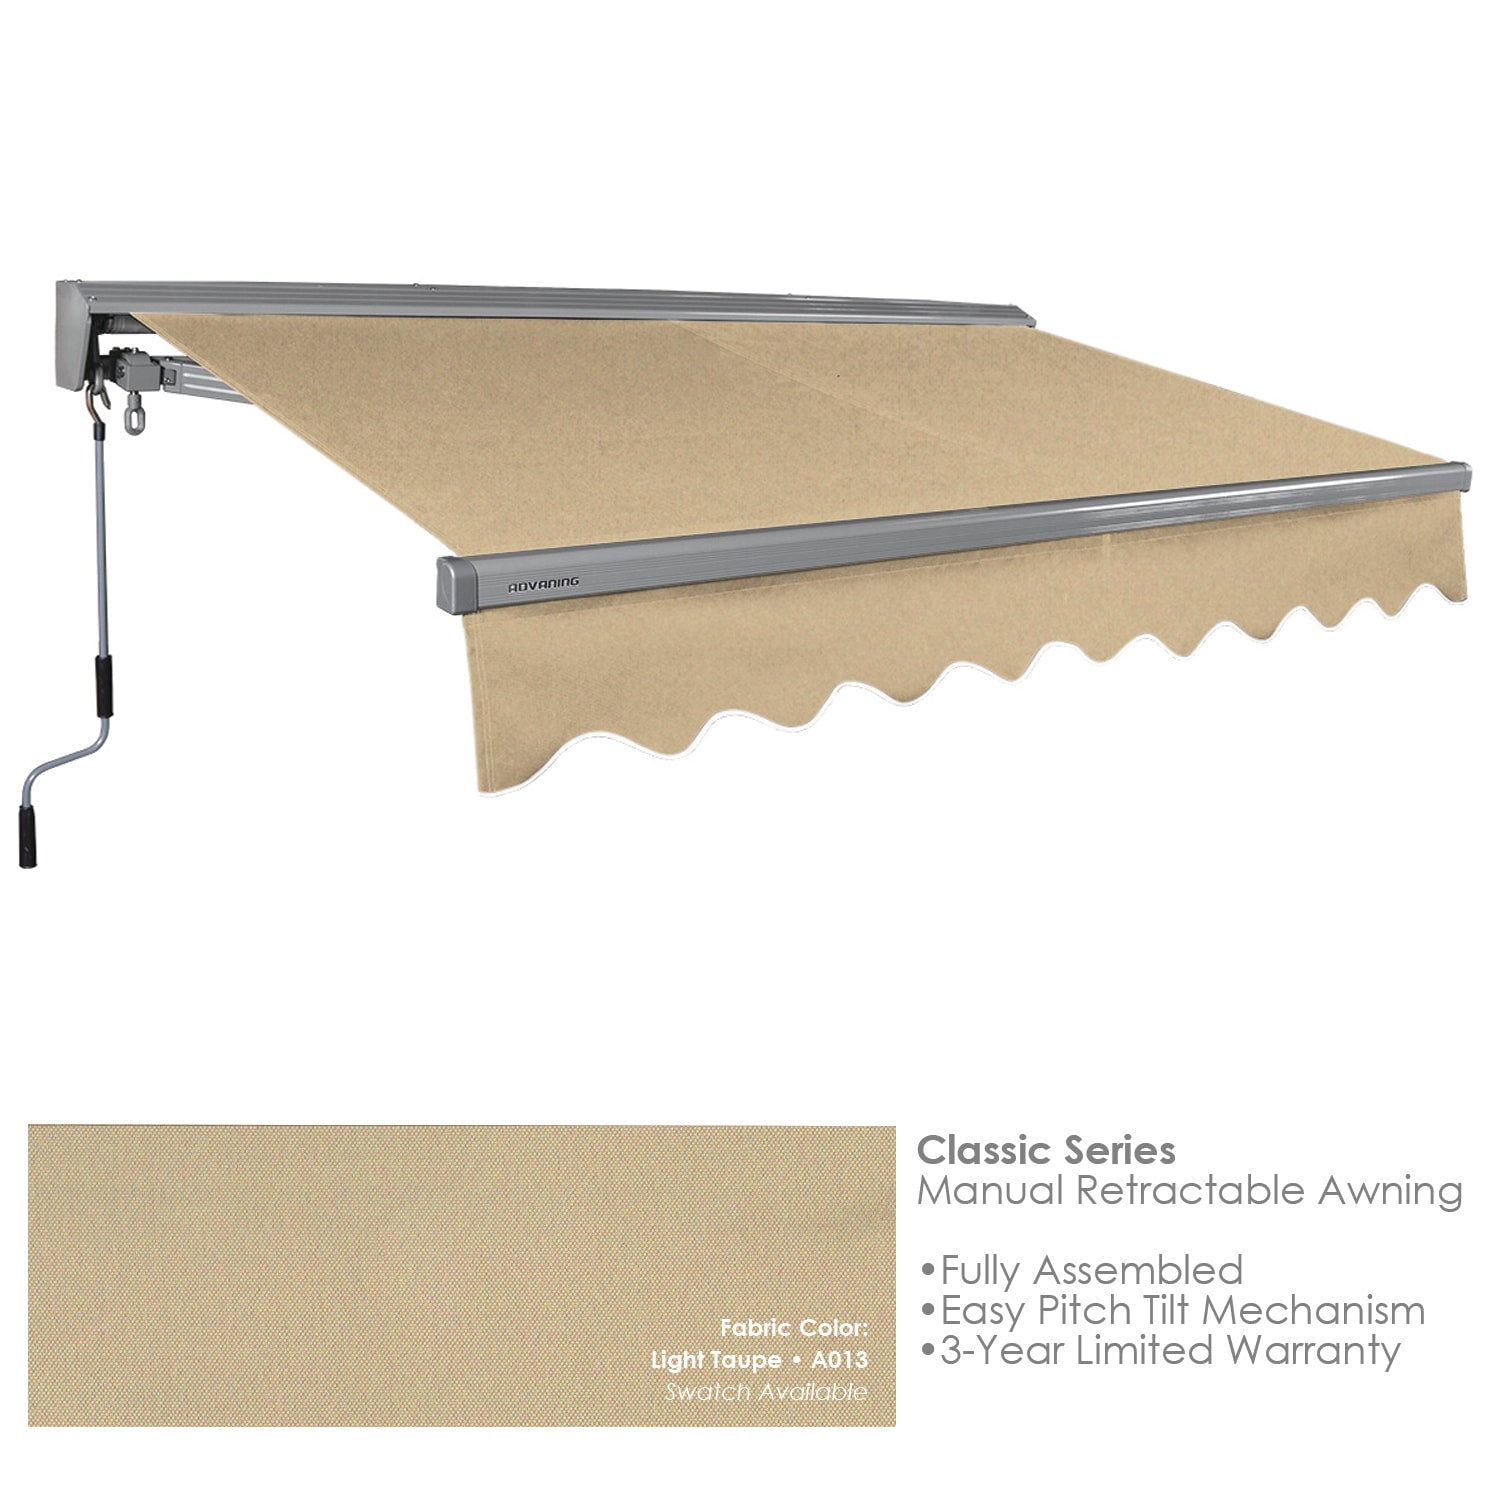 Advaning Classic Series (Manual Retractable Awning)